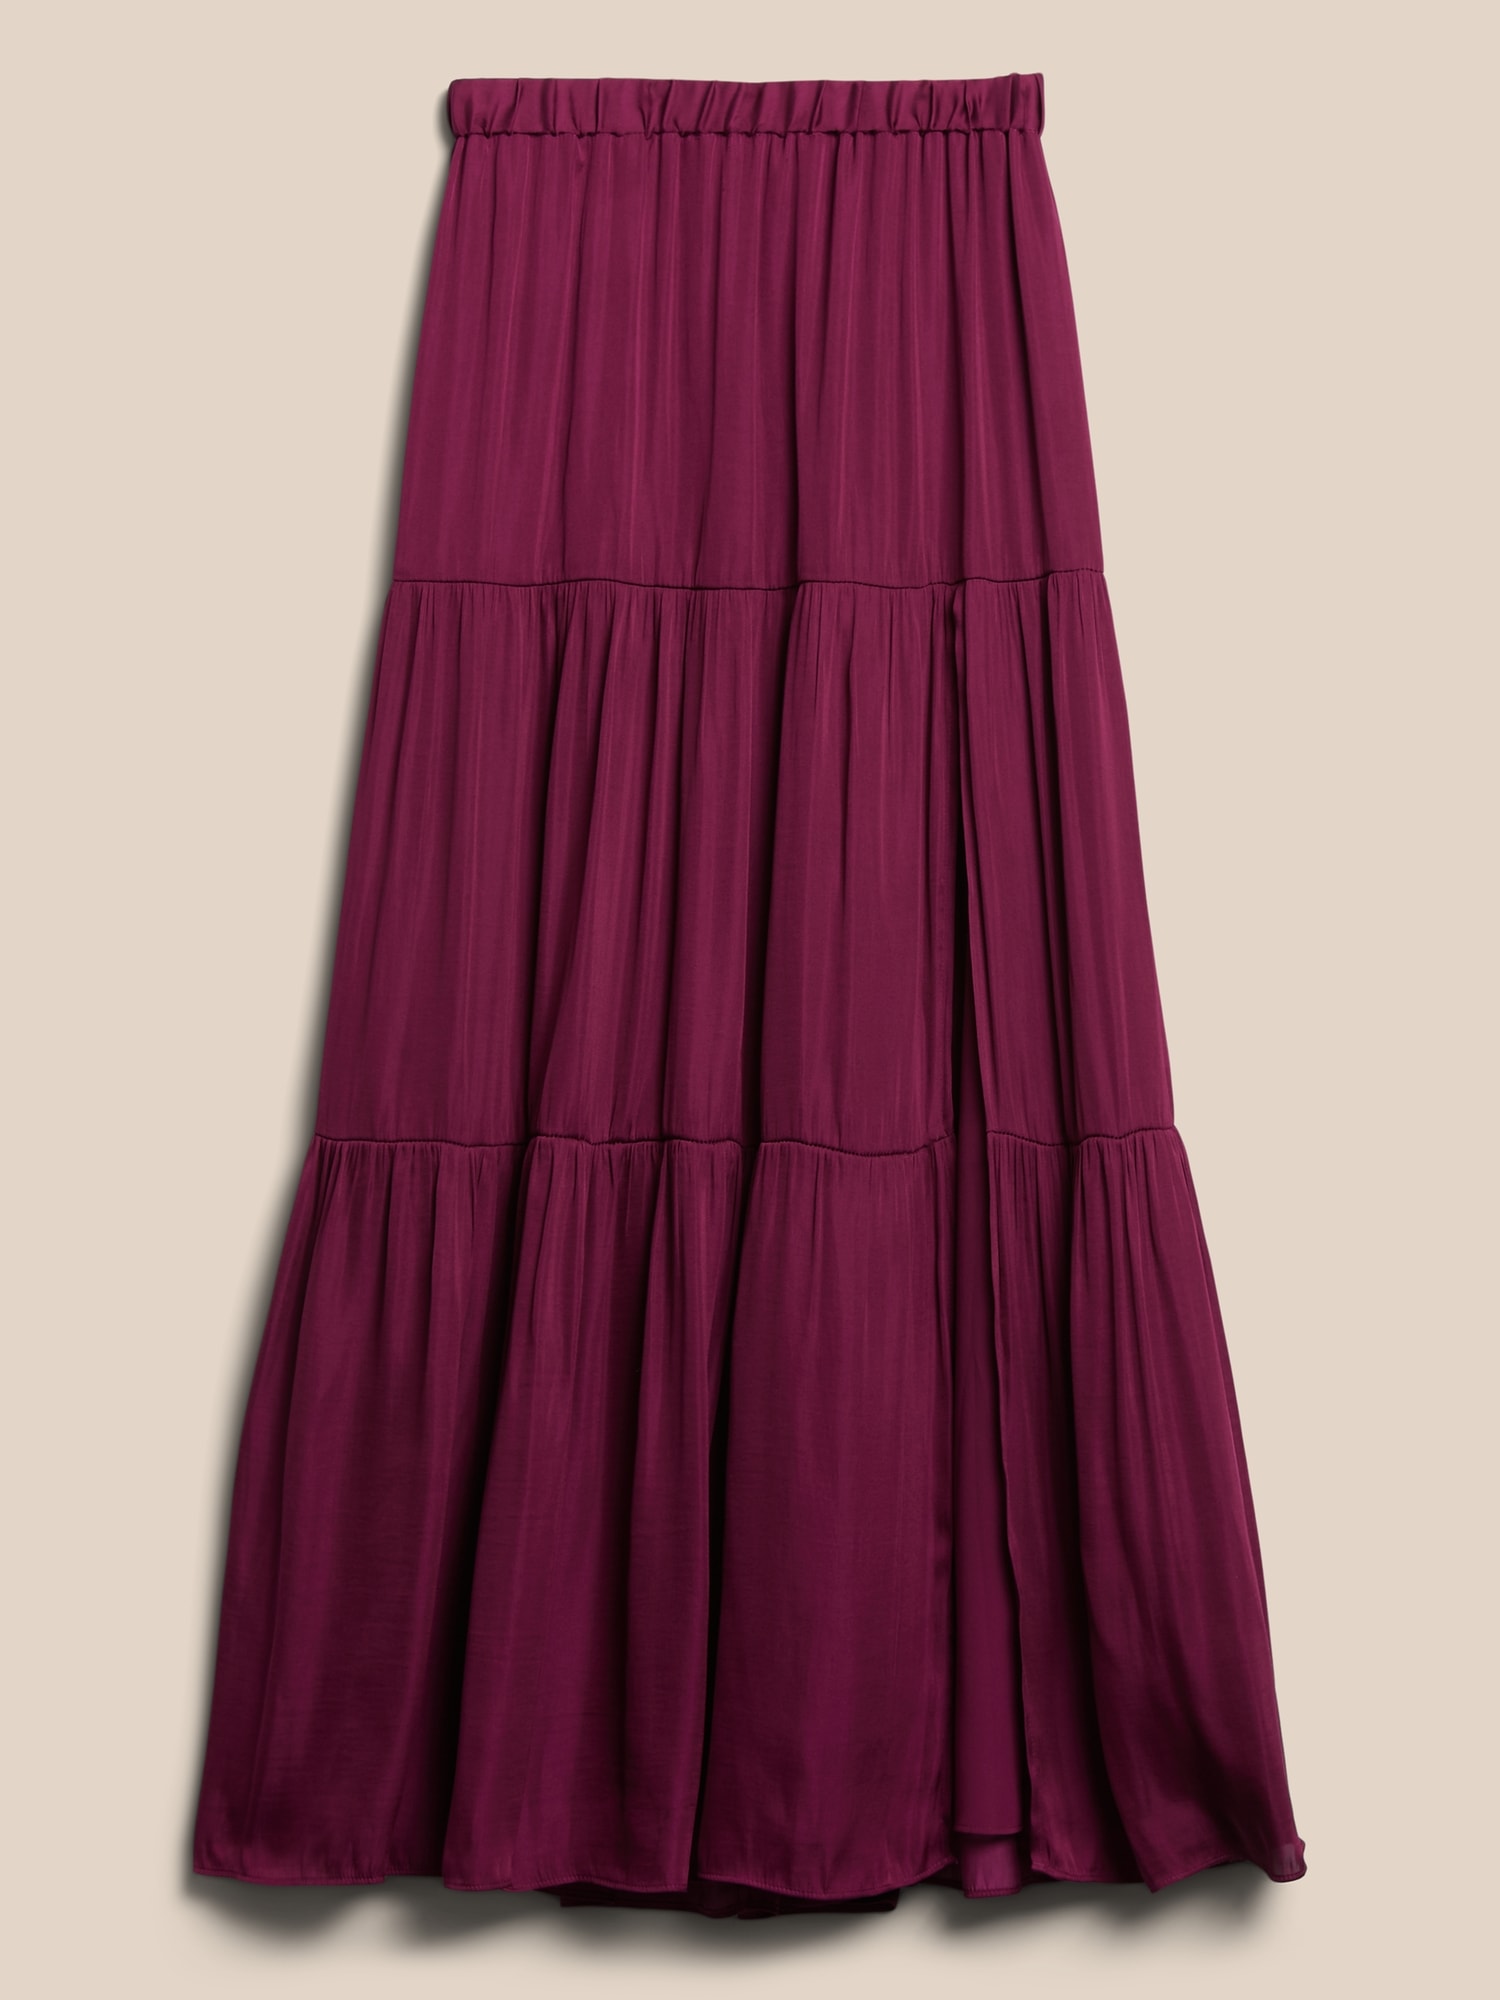 Tiered Soft Satin Skirt with Slit | Banana Republic